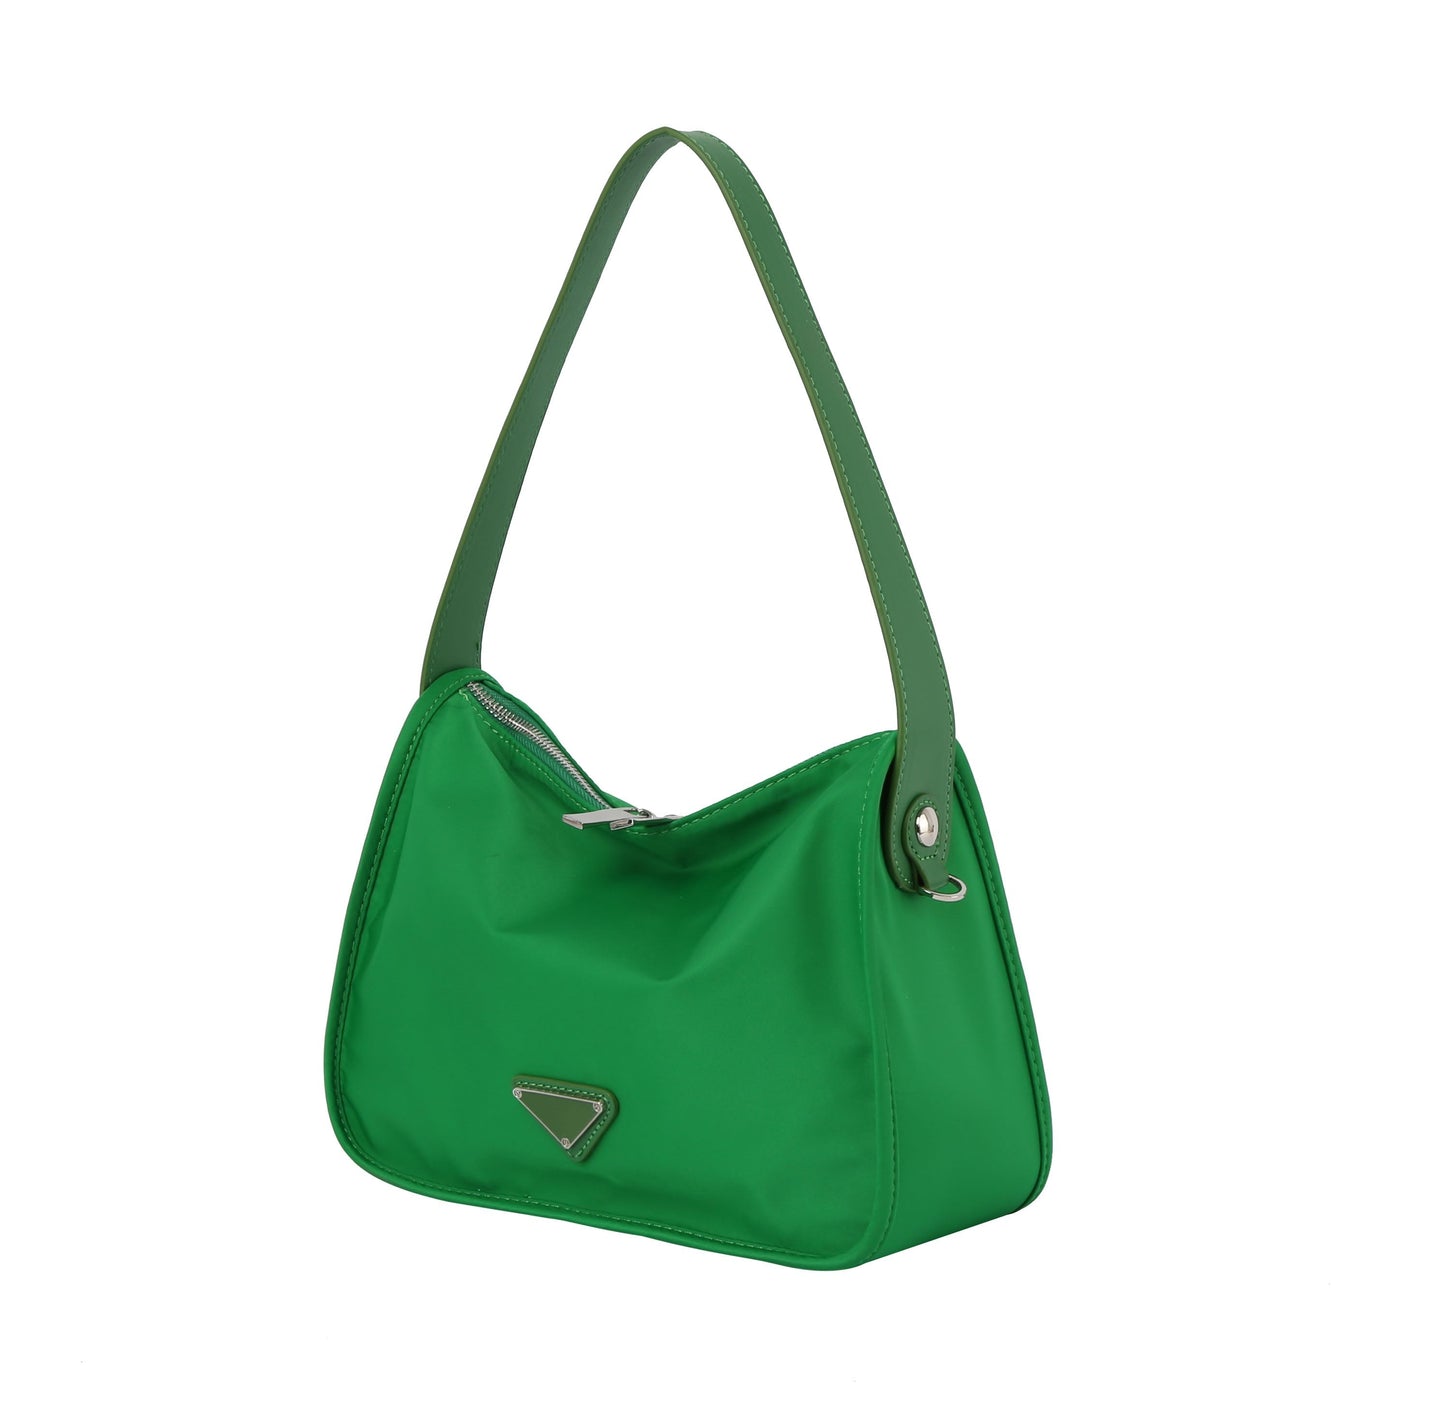 Invest In Yourself Bag In Emerald